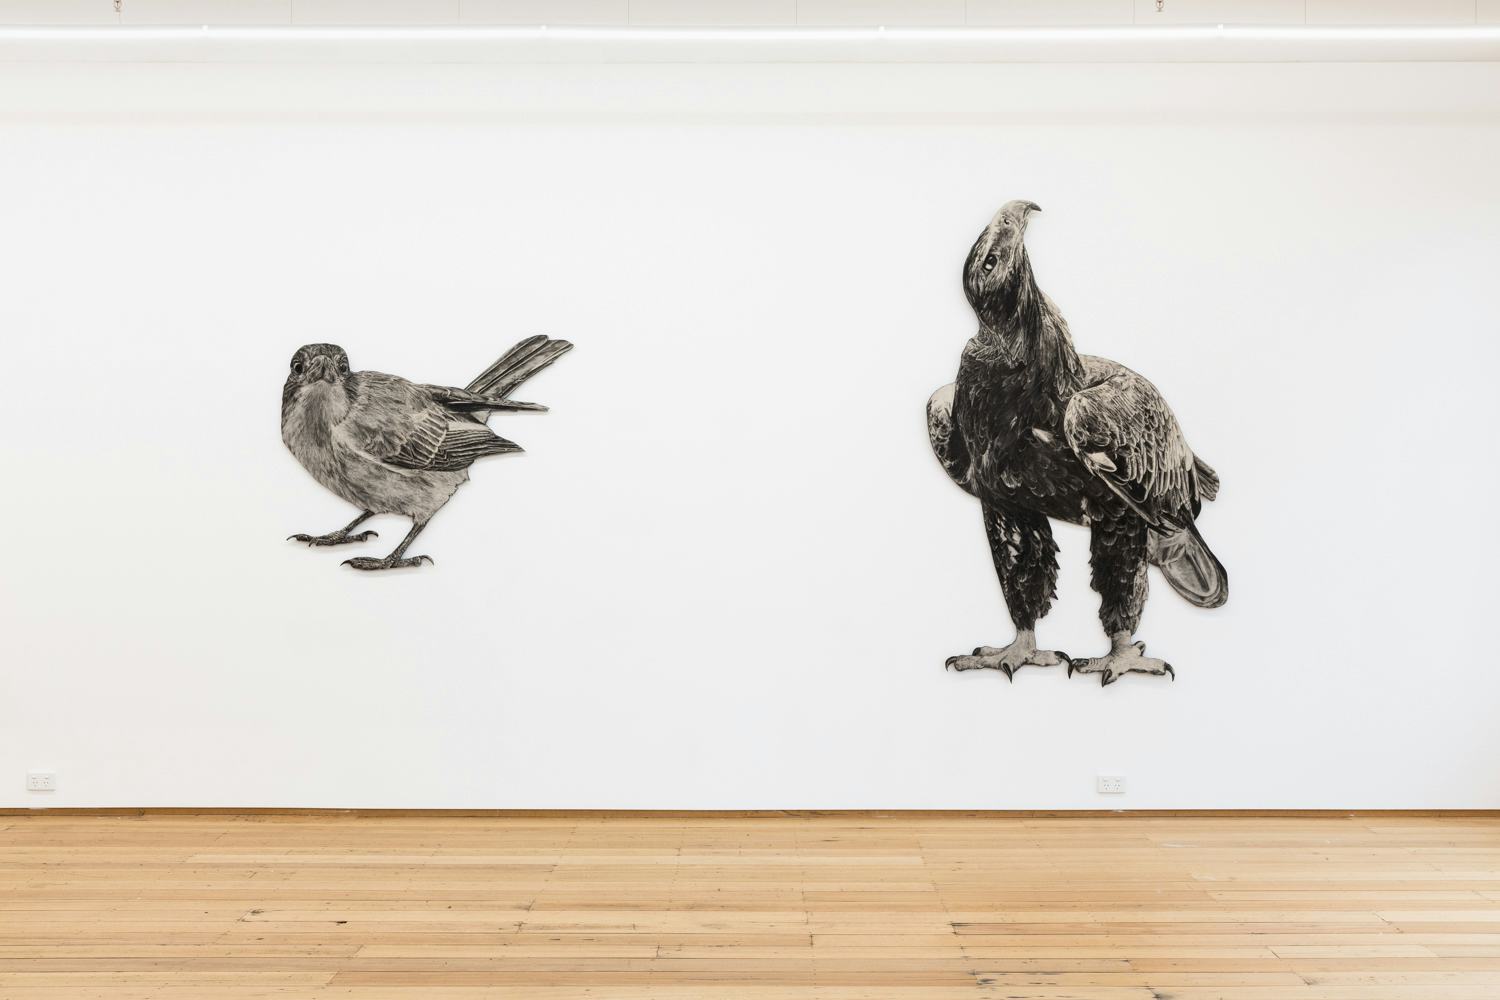 Anna Louise Richardson, installation view, 'Am I being told off (butcherbird), 2022, charcoal on cement fibreboard, 97 x 123cm. And 'I asked for a sign (wedge-tailed eagle), 2022, charcoal on cement fibreboard, 202 x 126cm. Photo by Janelle Low 